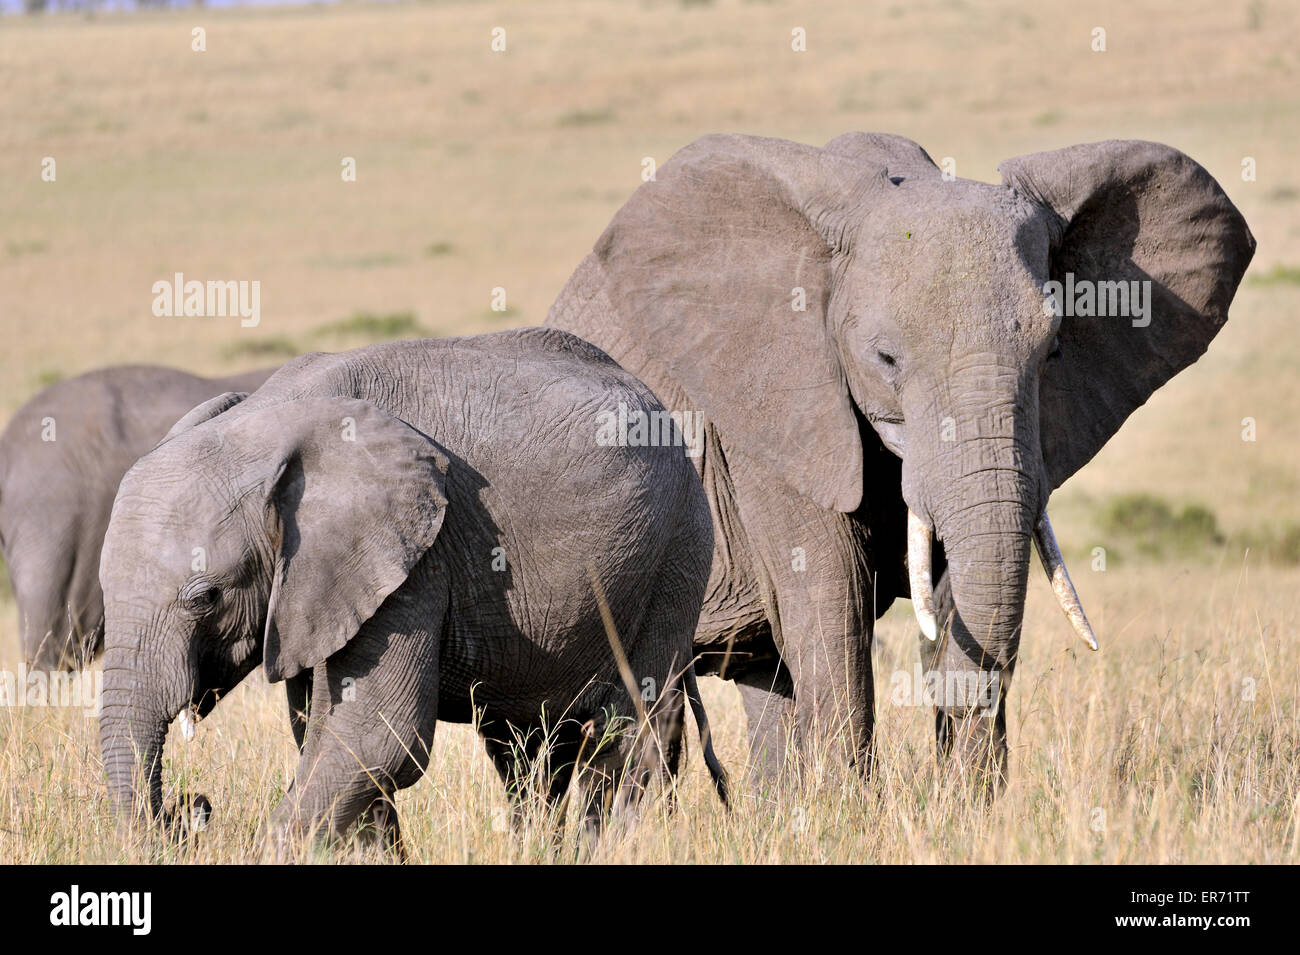 Young elephant and its mother in the Masai Mara Stock Photo